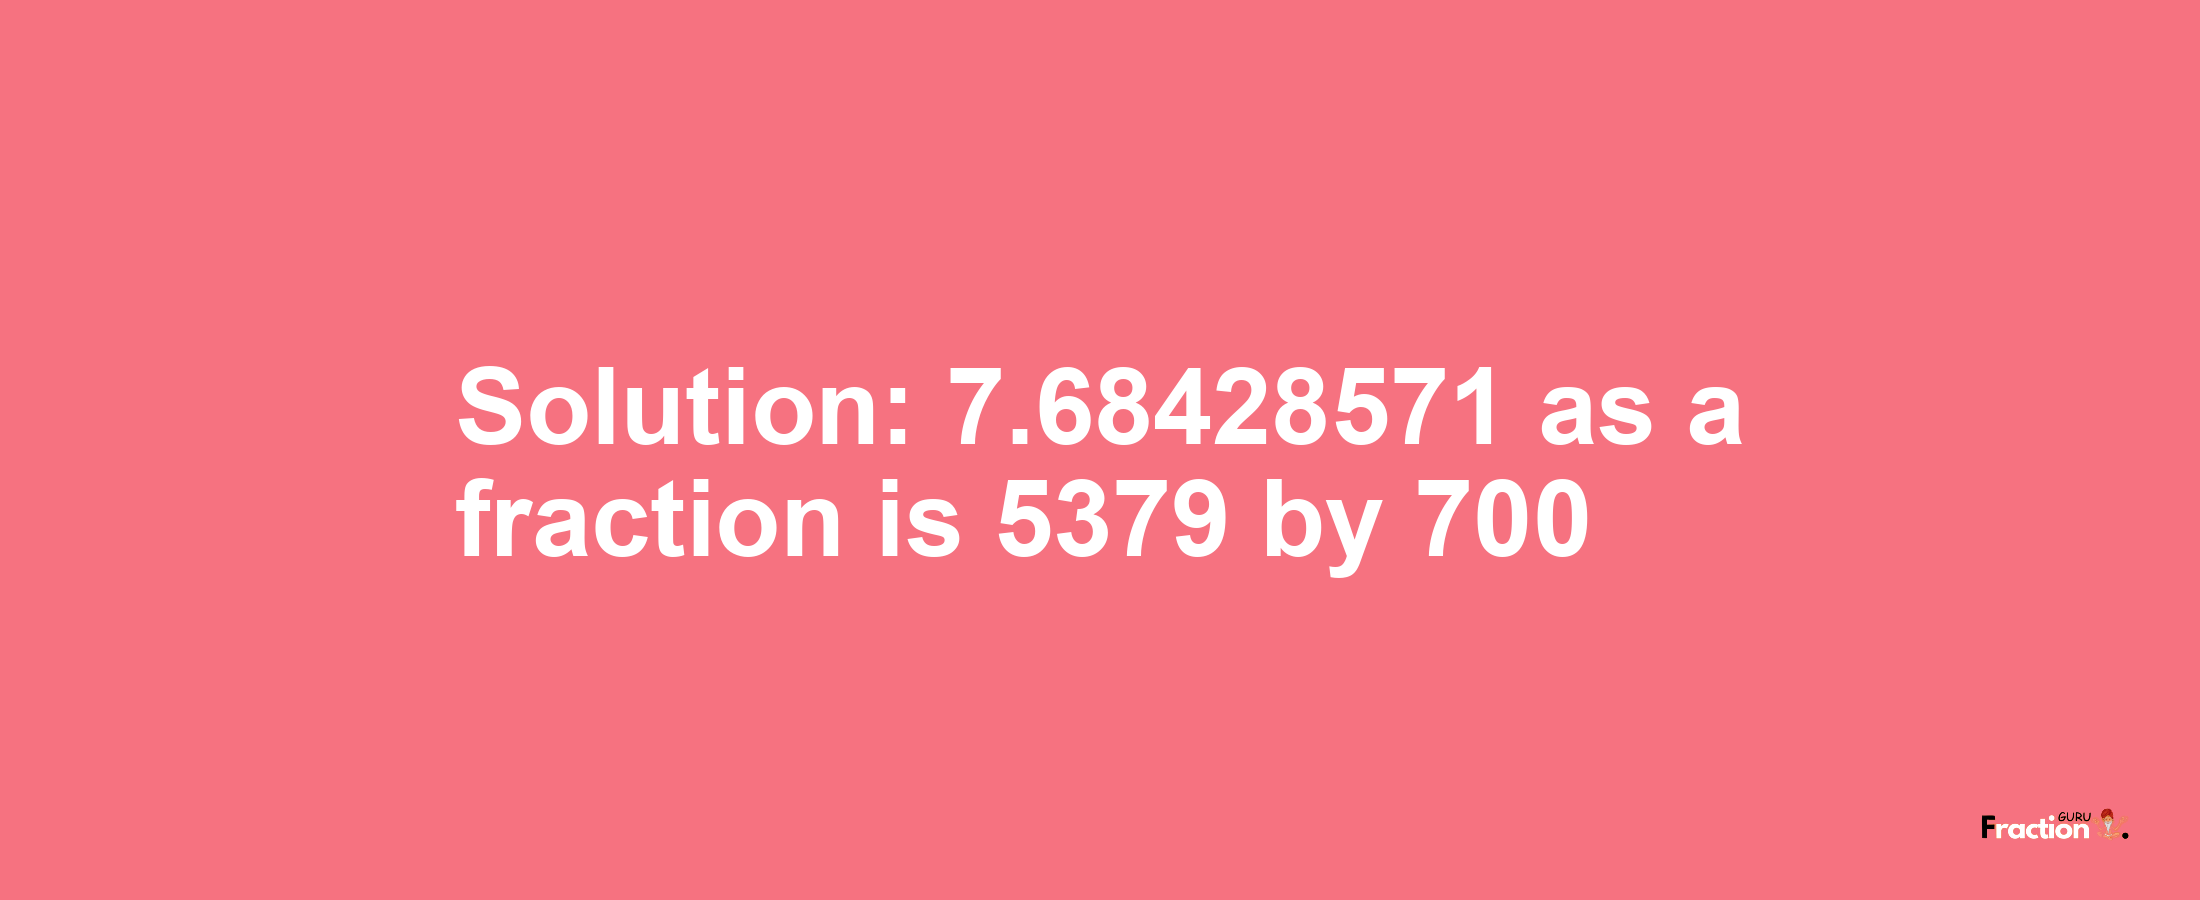 Solution:7.68428571 as a fraction is 5379/700